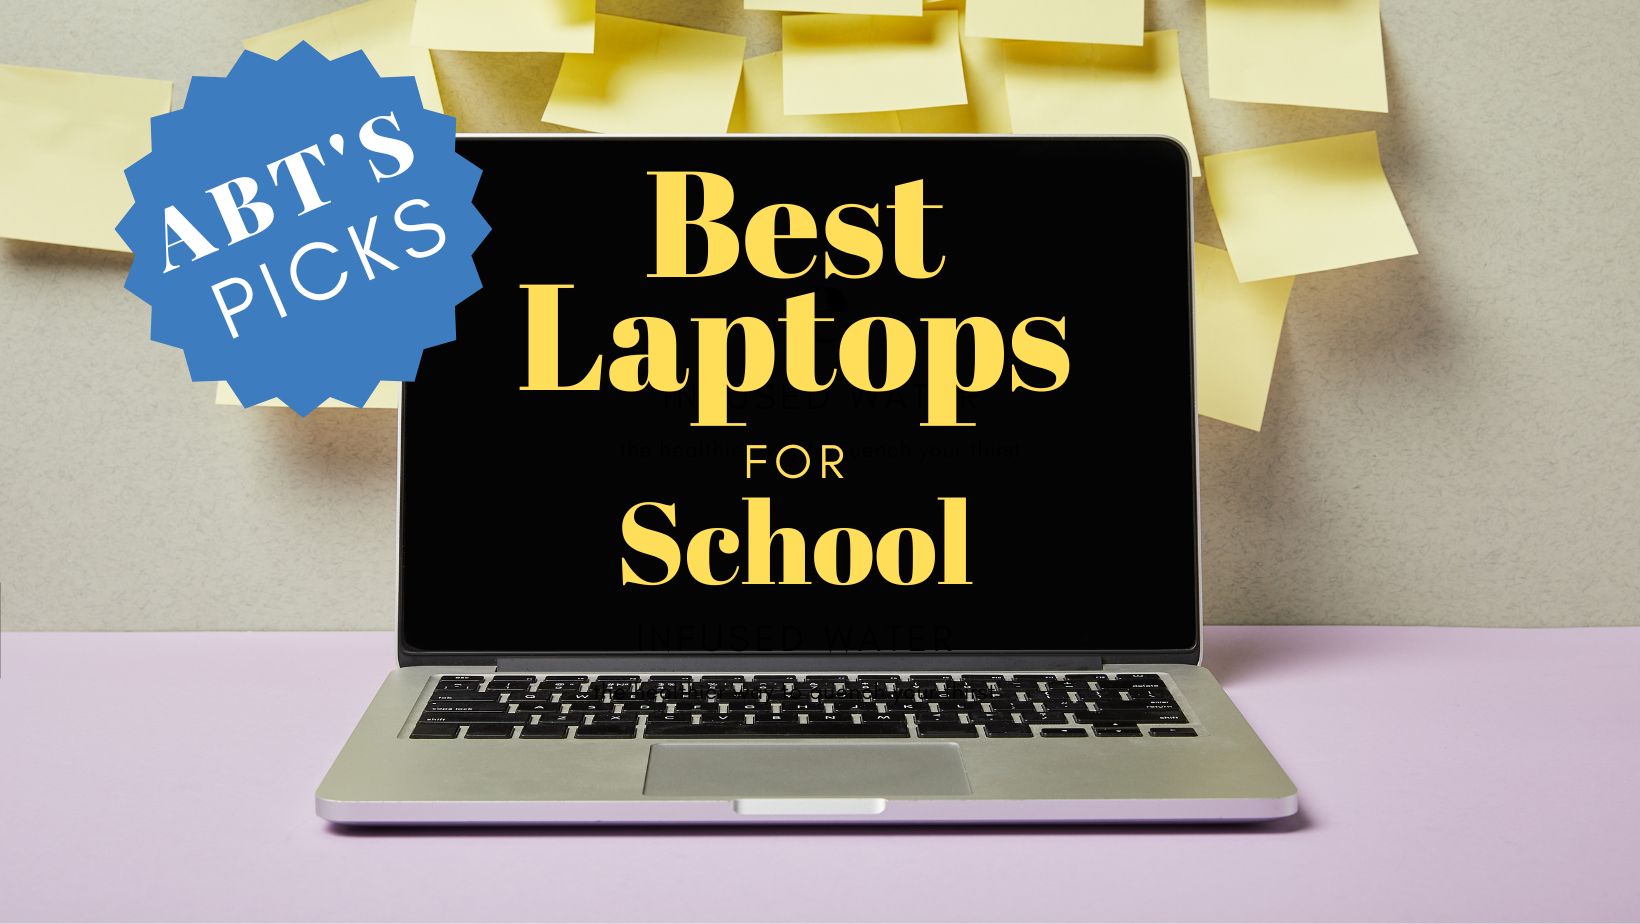 Silver laptop with yellow text on the screen that reads "best laptops for school"